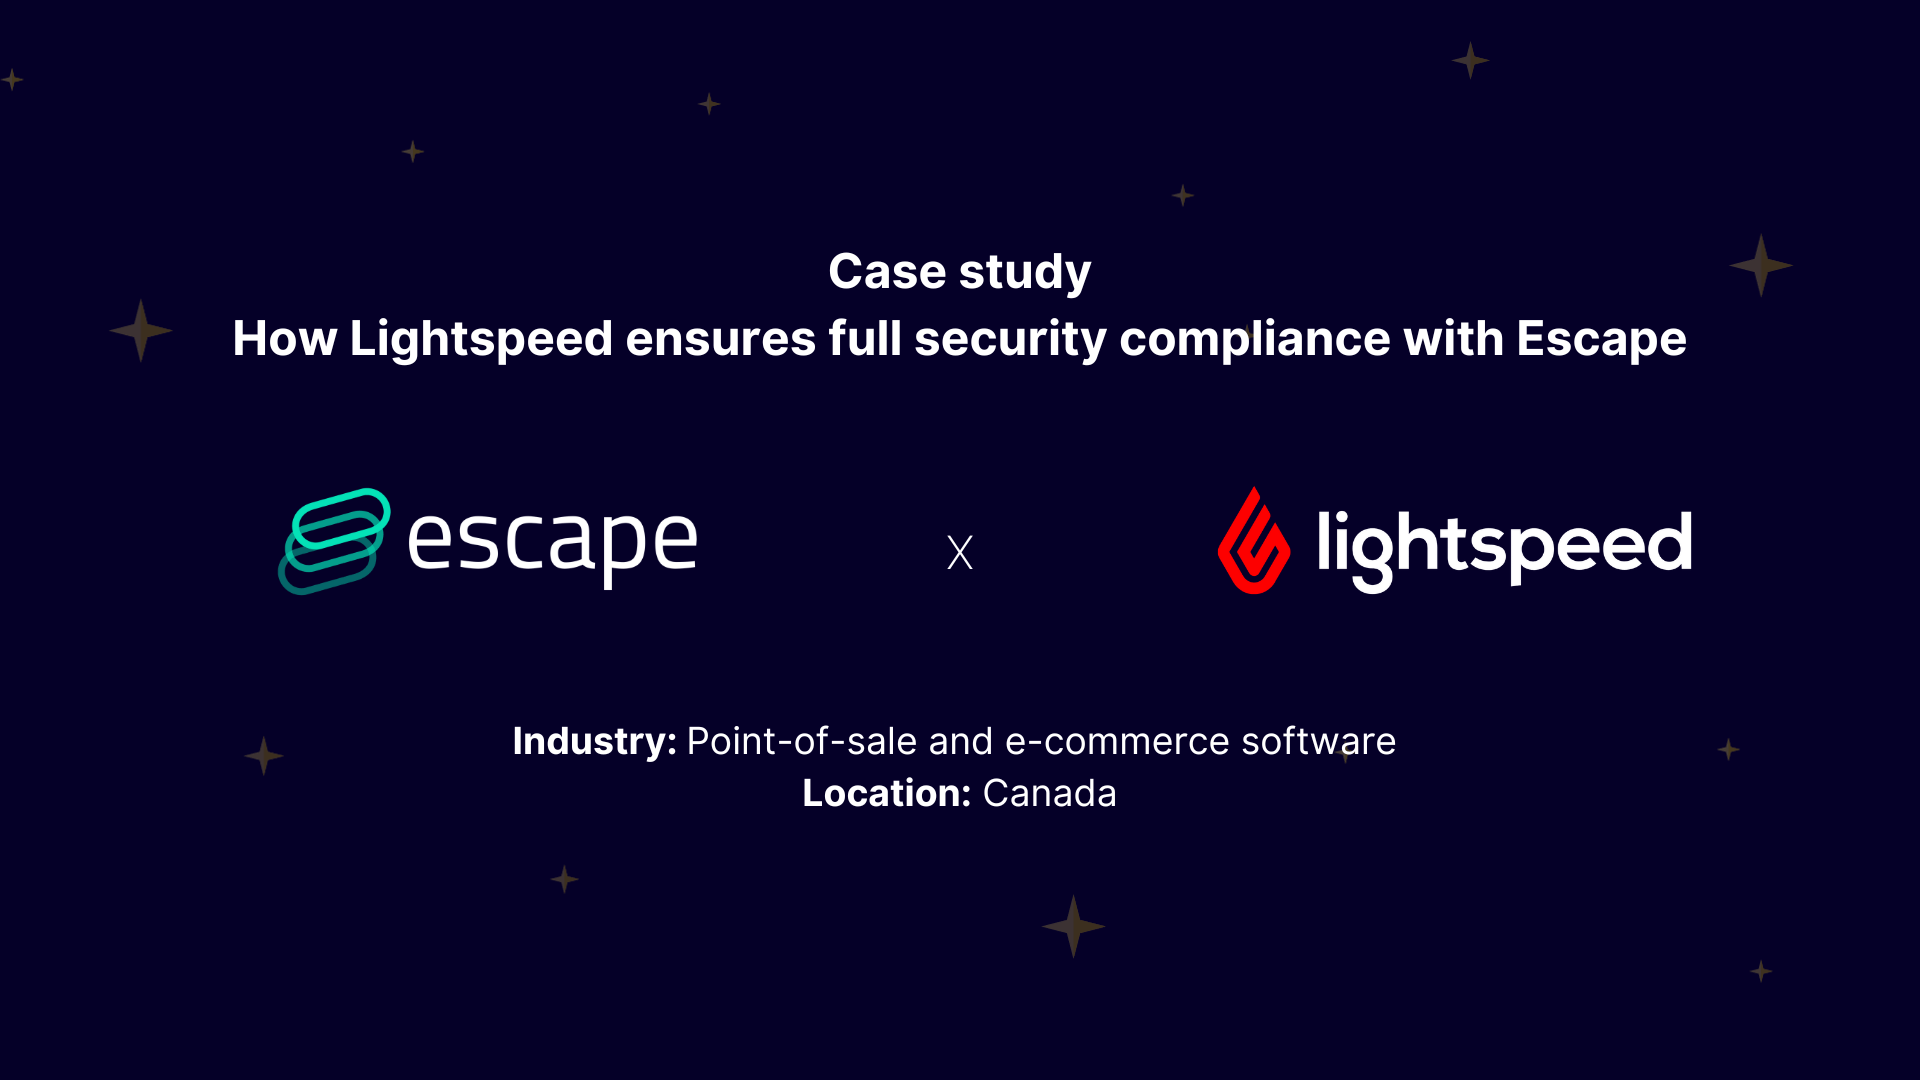 Case Study: How Lightspeed ensures full security compliance with Escape